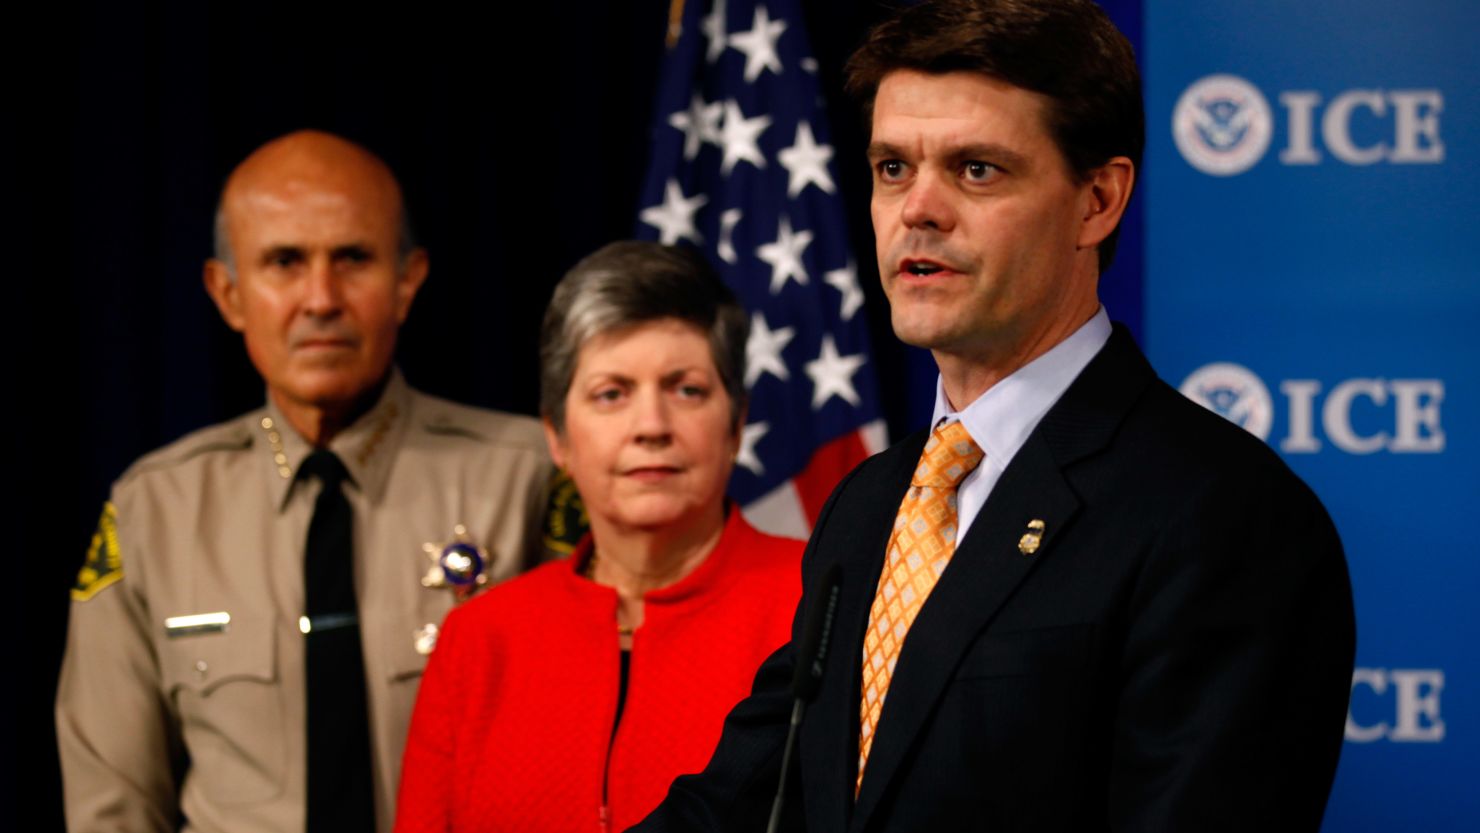 ICE Director John Morton, right, with Los Angeles County Sheriff Lee Baca and Homeland Security Secretary Janet Napolitano.